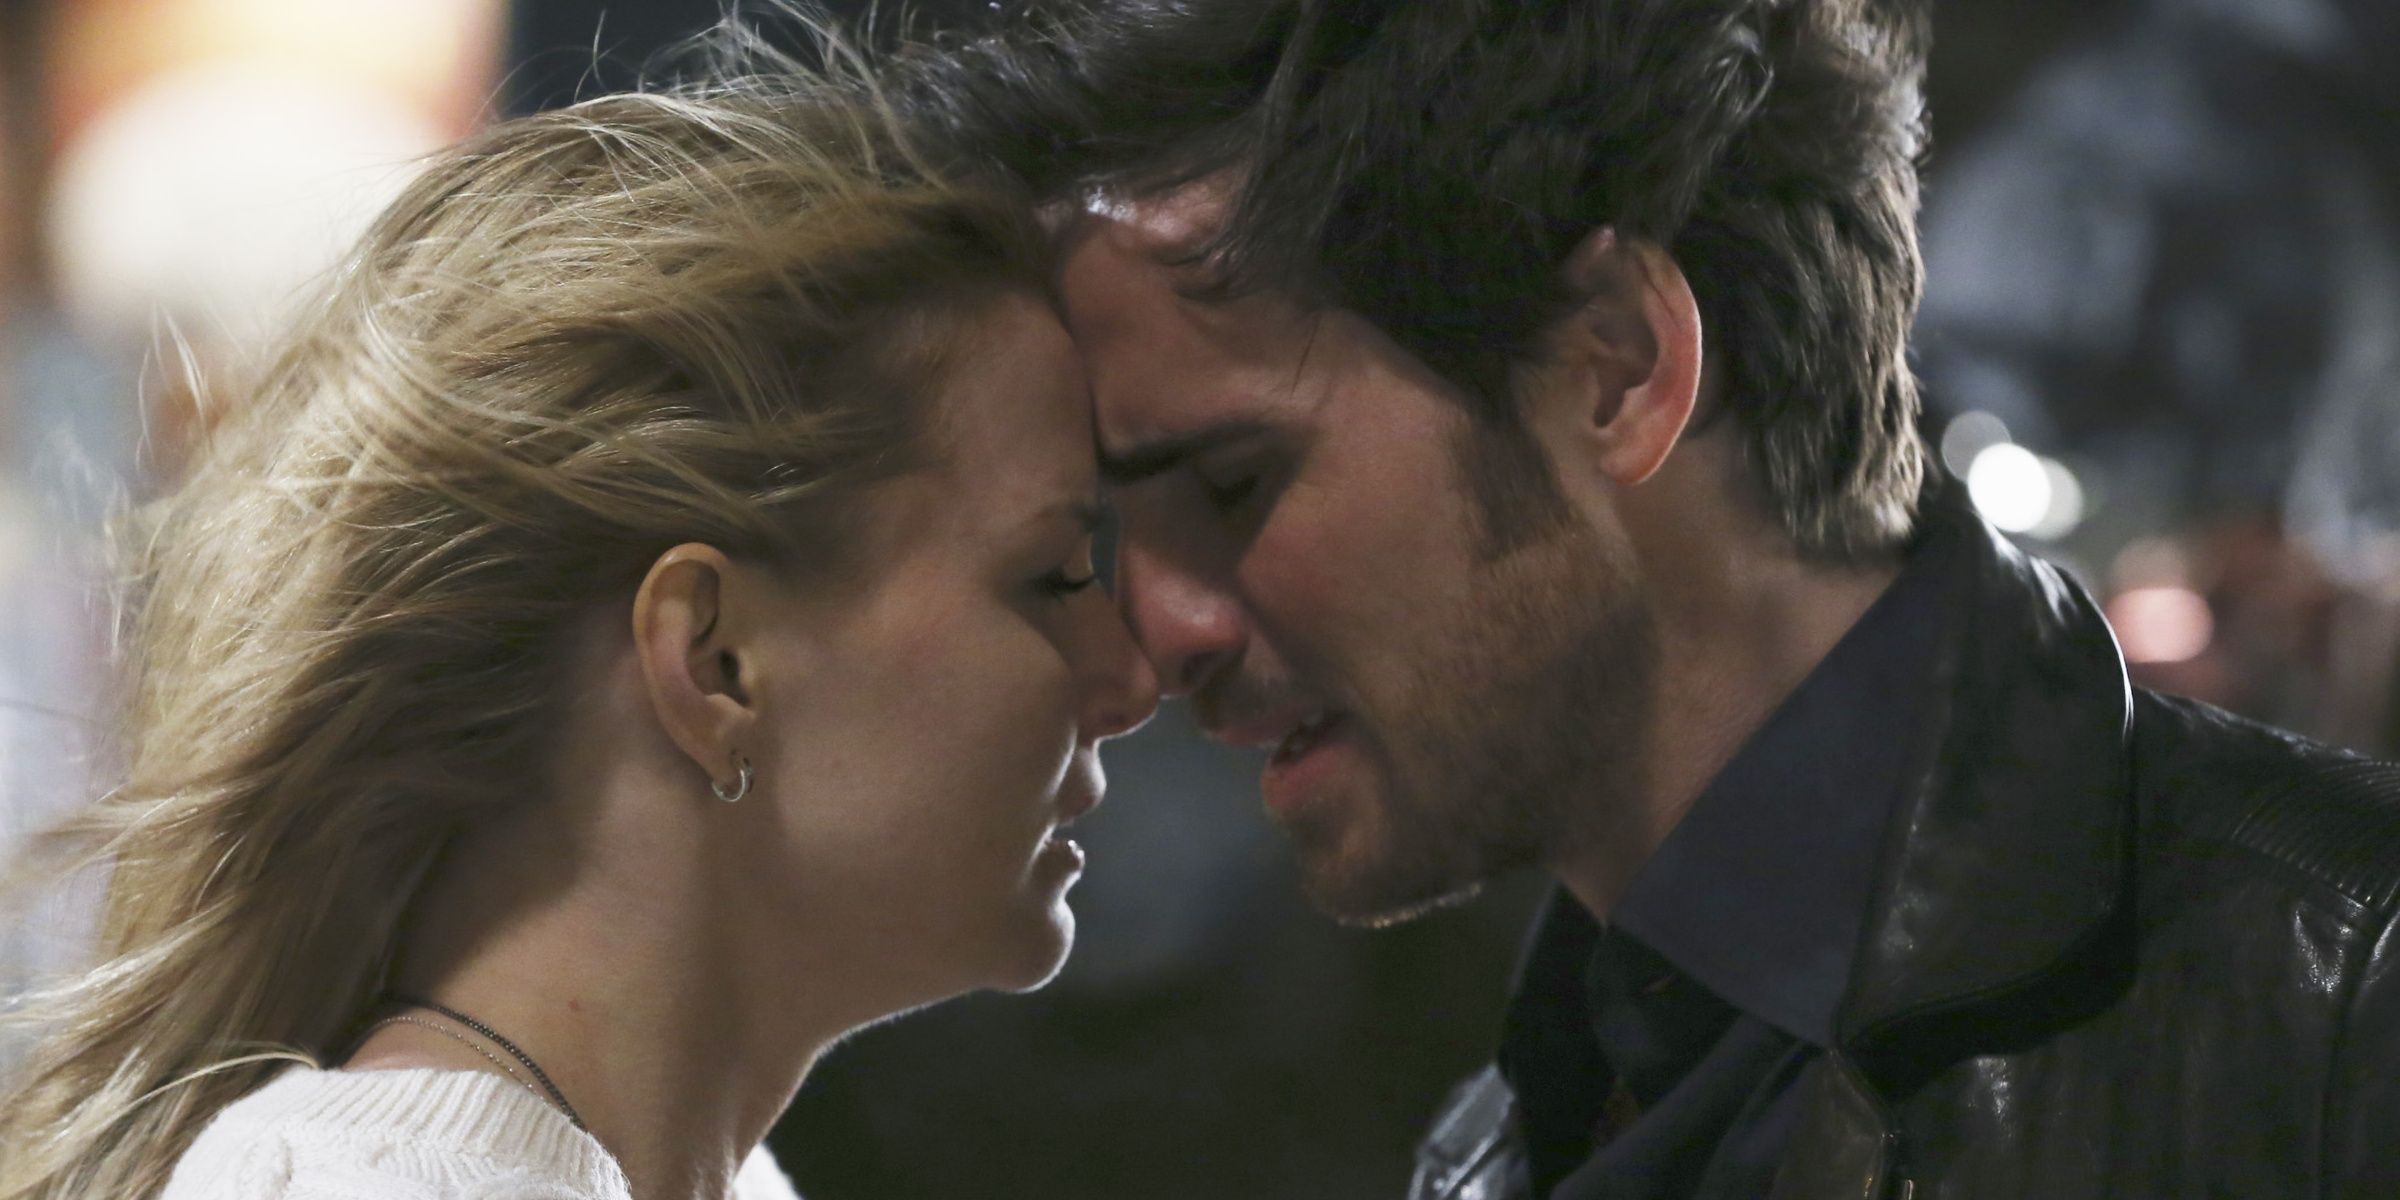 Hook and Emma touching foreheads as their hair flies in Once Upon a Time.